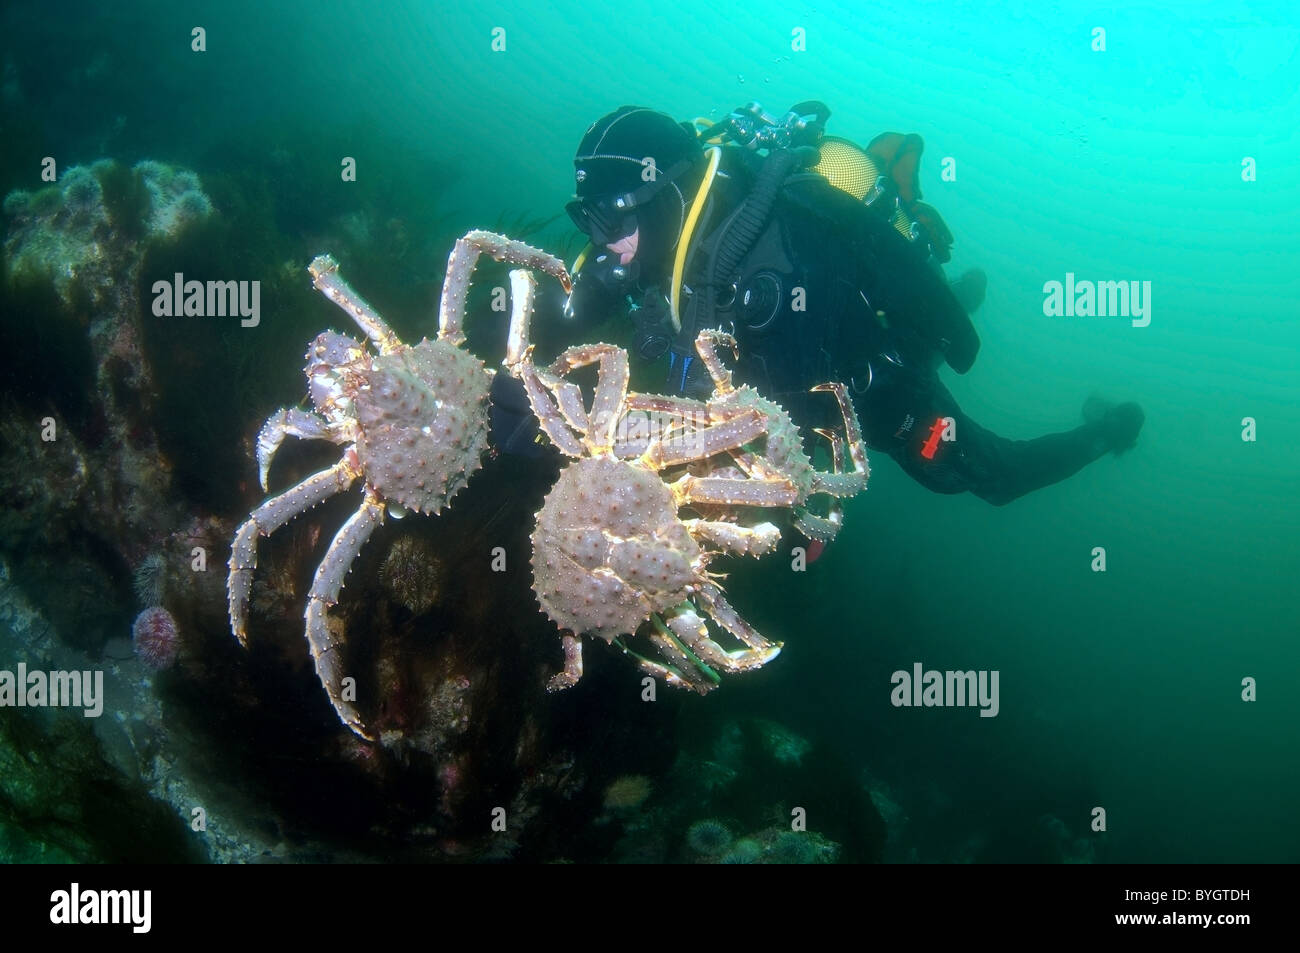 Maschio sub catture Red King Crab (Paralithodes camtschaticus) Foto Stock